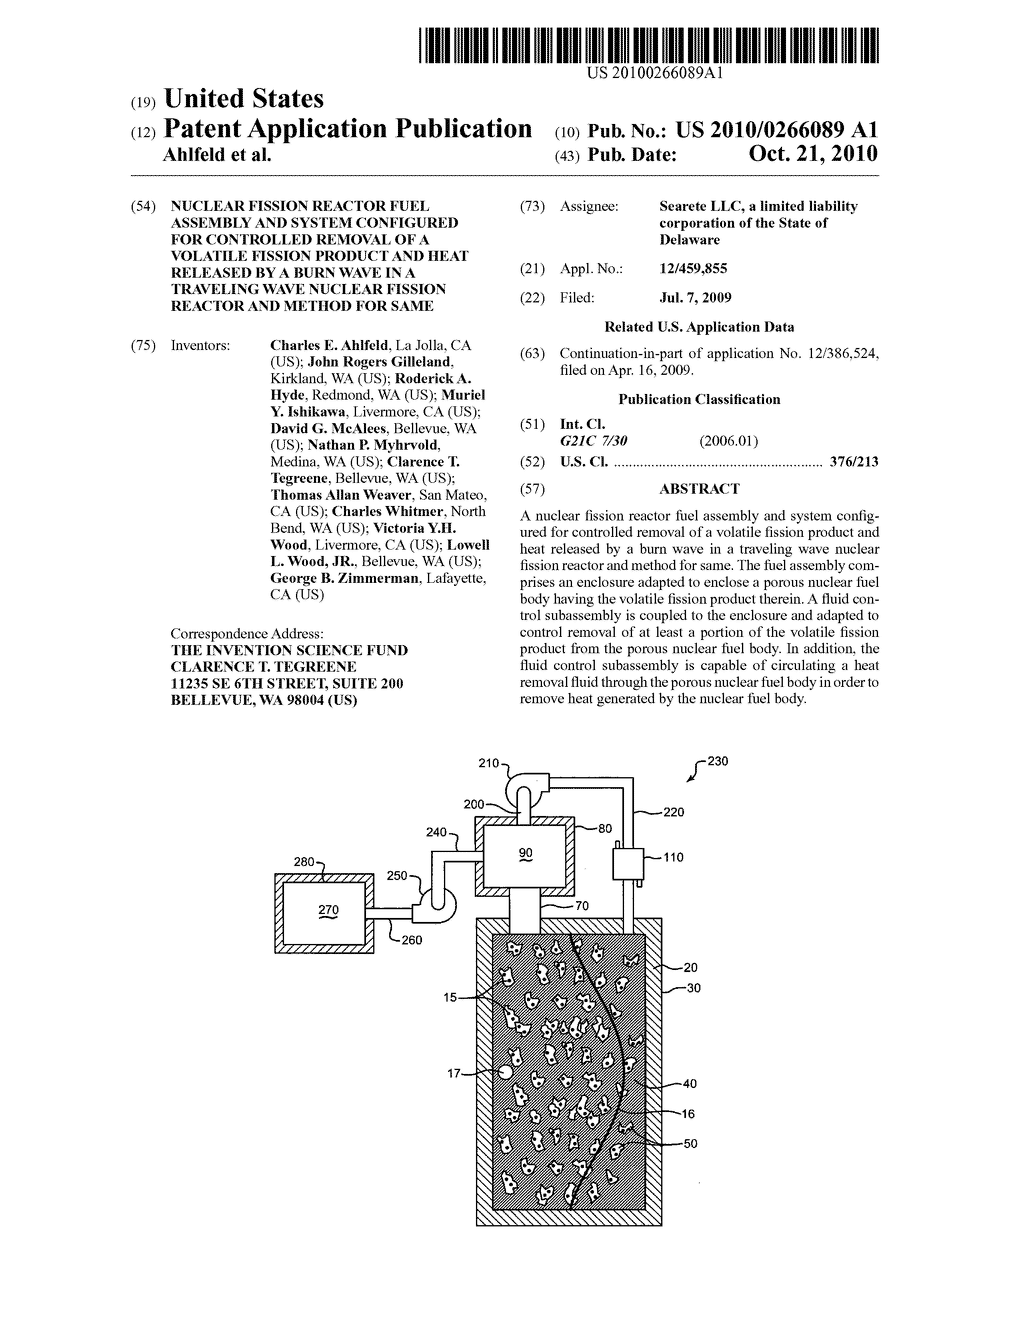 Nuclear fission reactor fuel assembly and system configured for controlled removal of a volatile fission product and heat released by a burn wave in a traveling wave nuclear fission reactor and method for same - diagram, schematic, and image 01